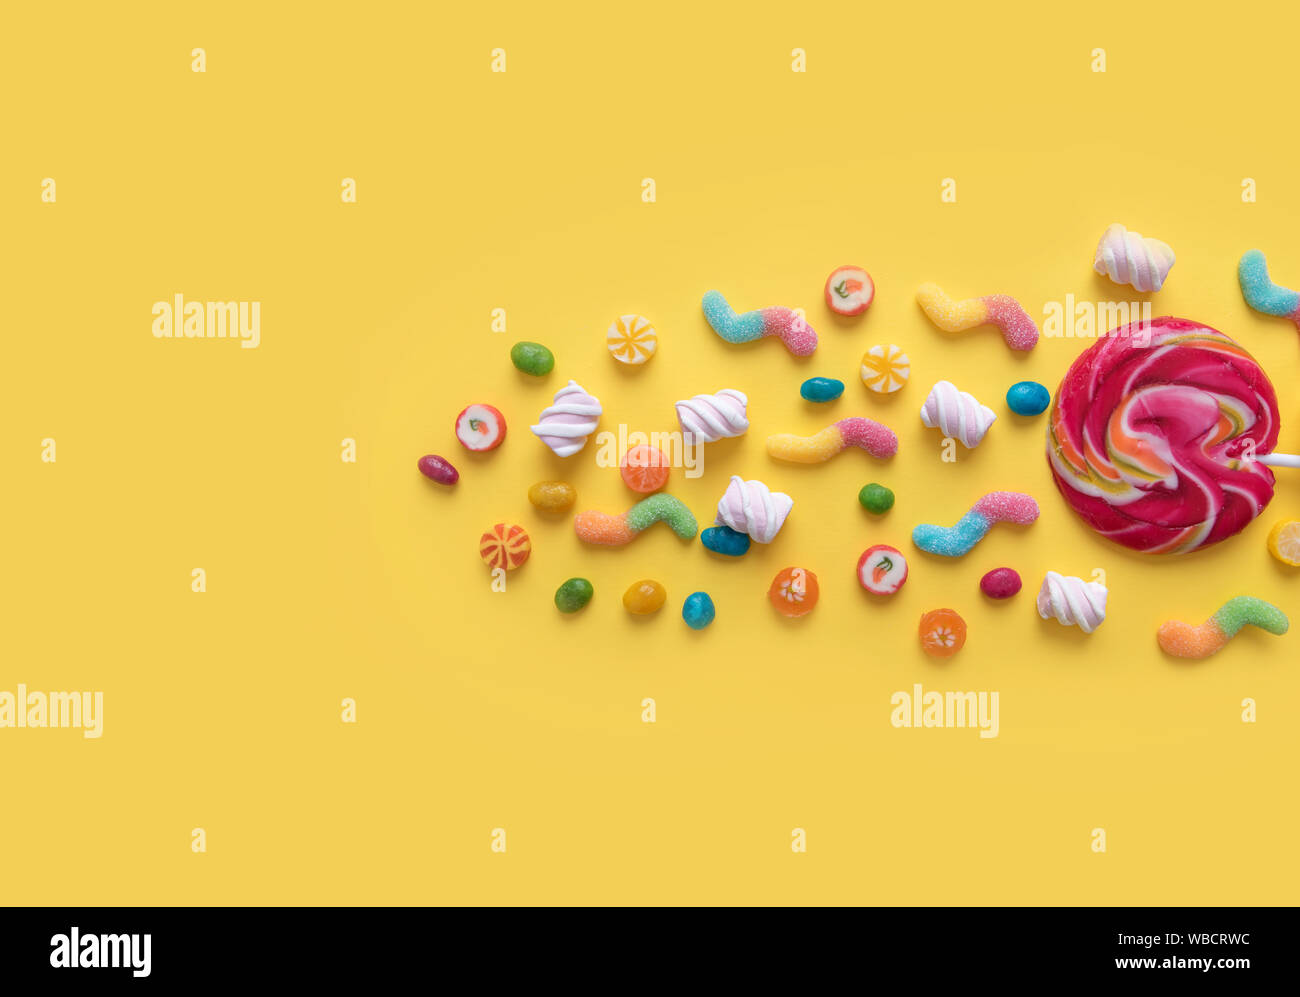 Scattering of sweets on a yellow background. Stock Photo